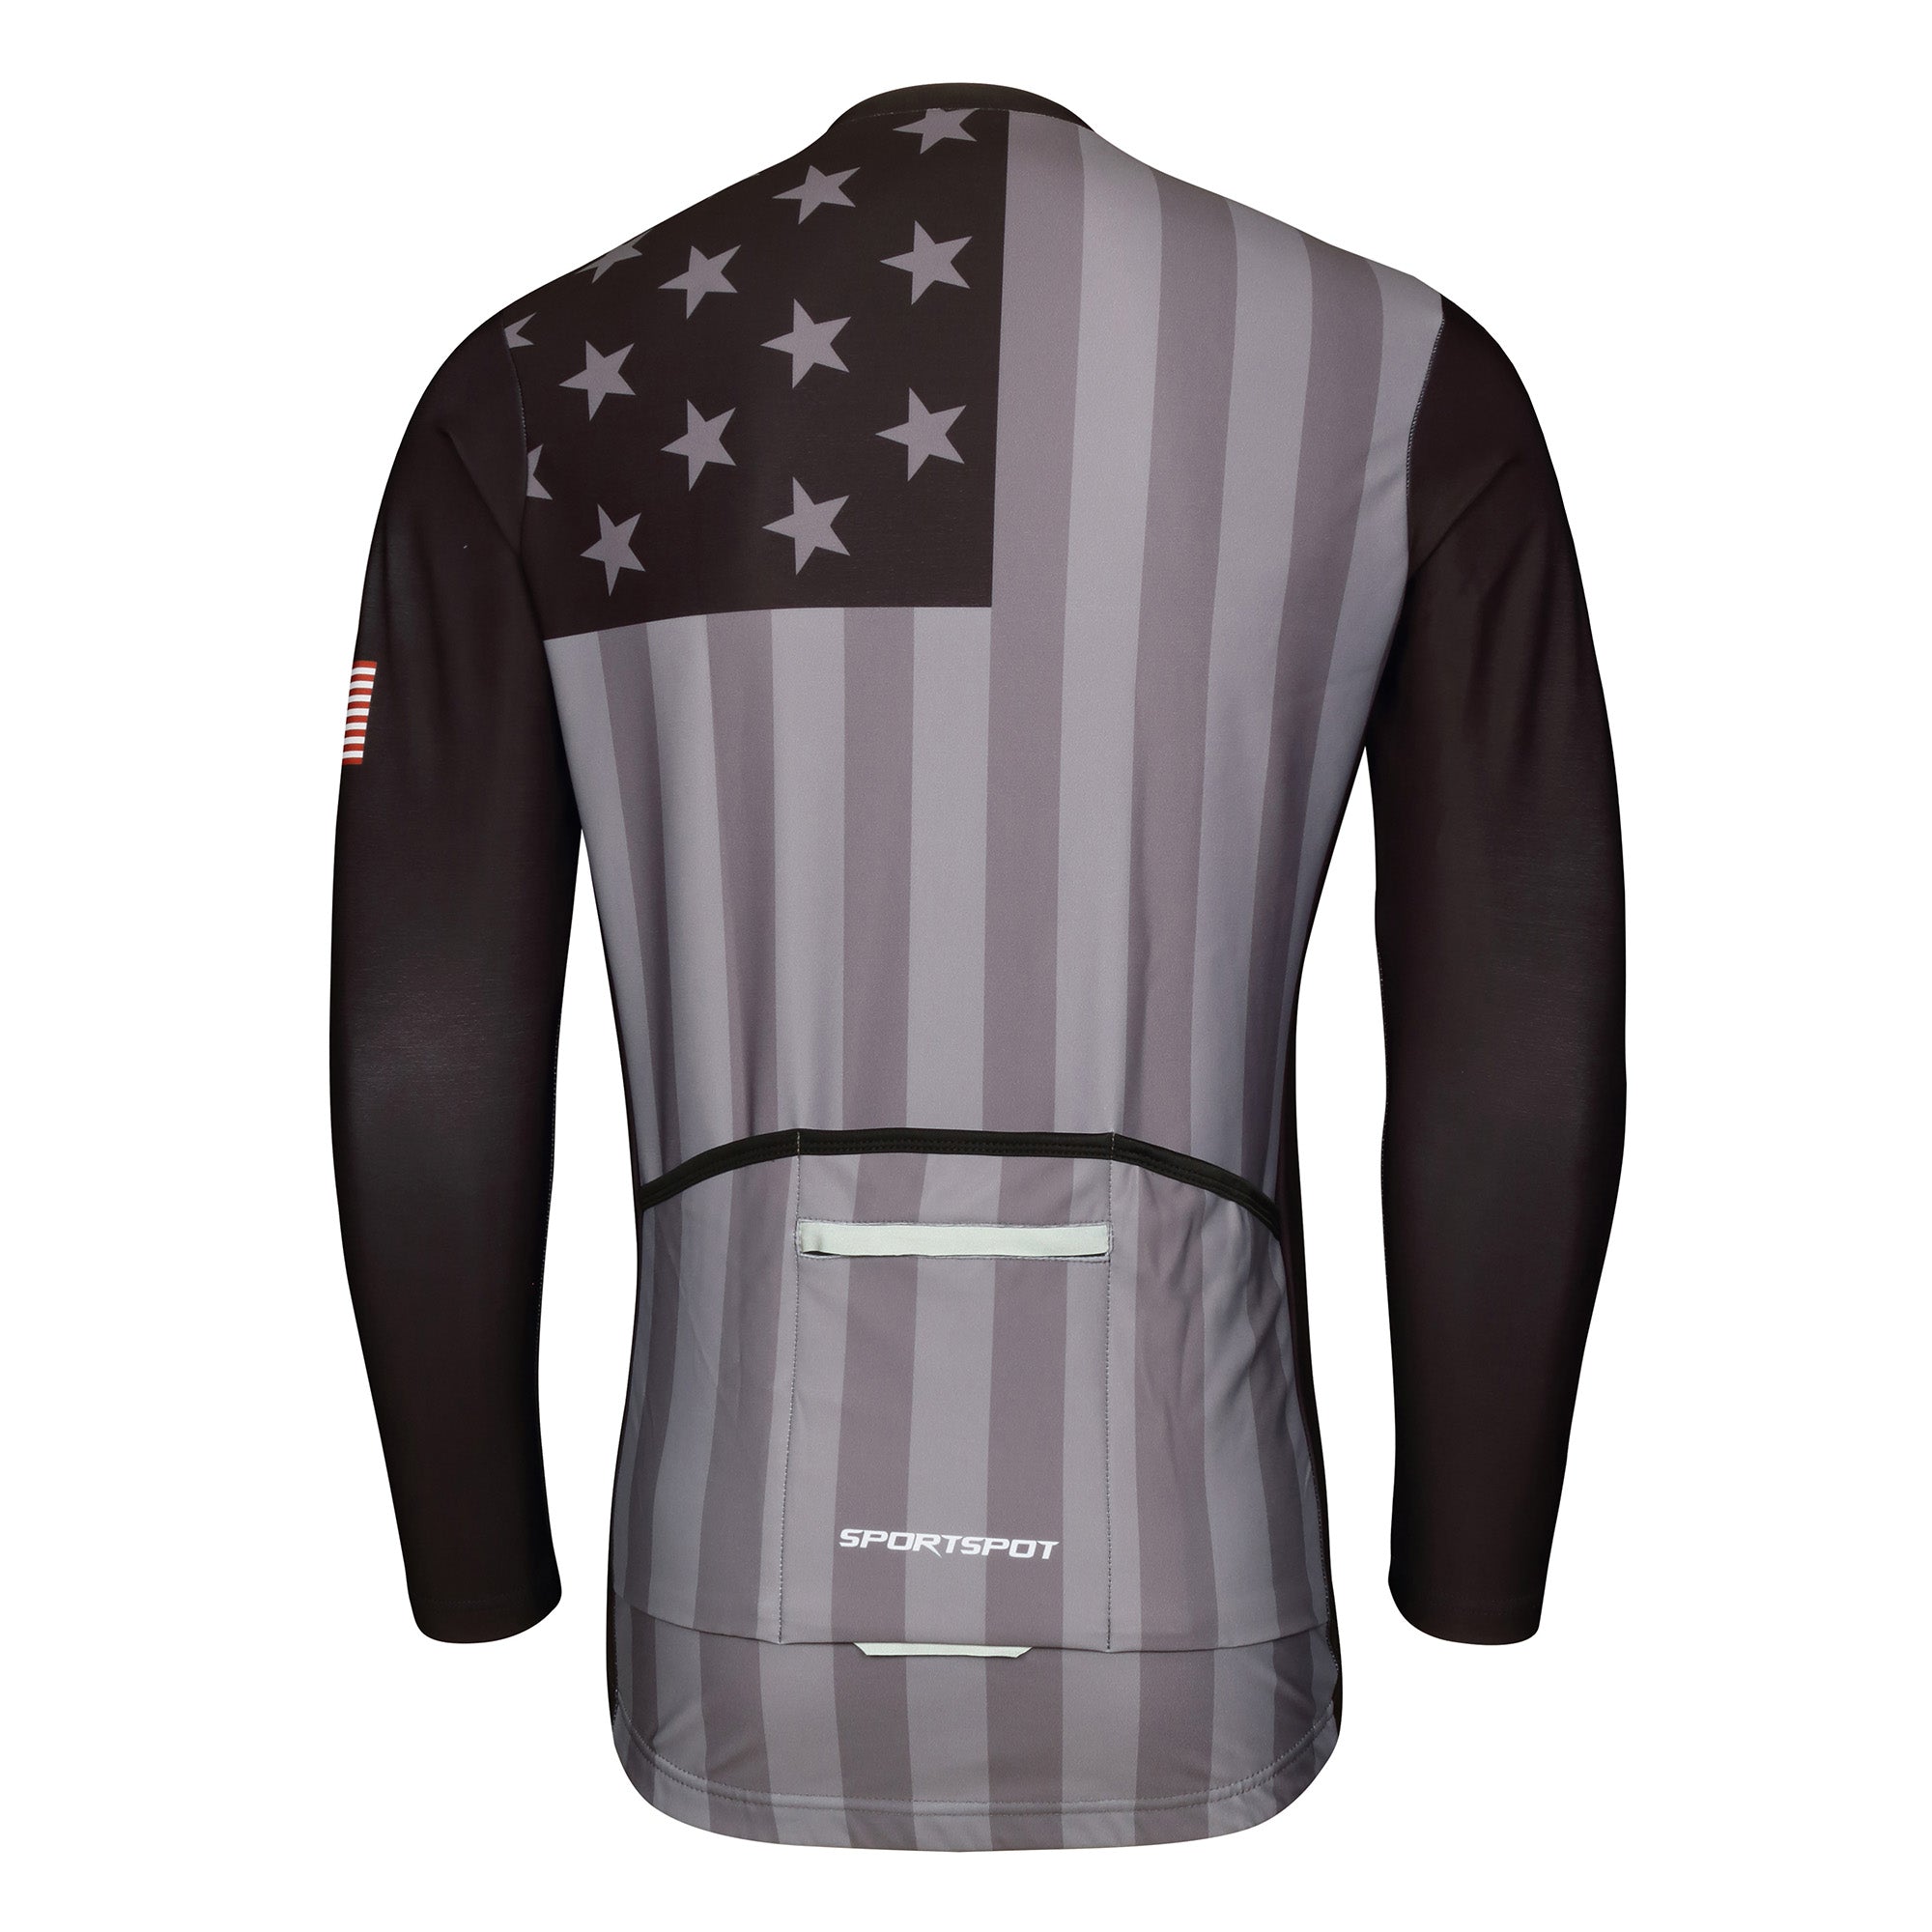 Jenner Cycling Suit